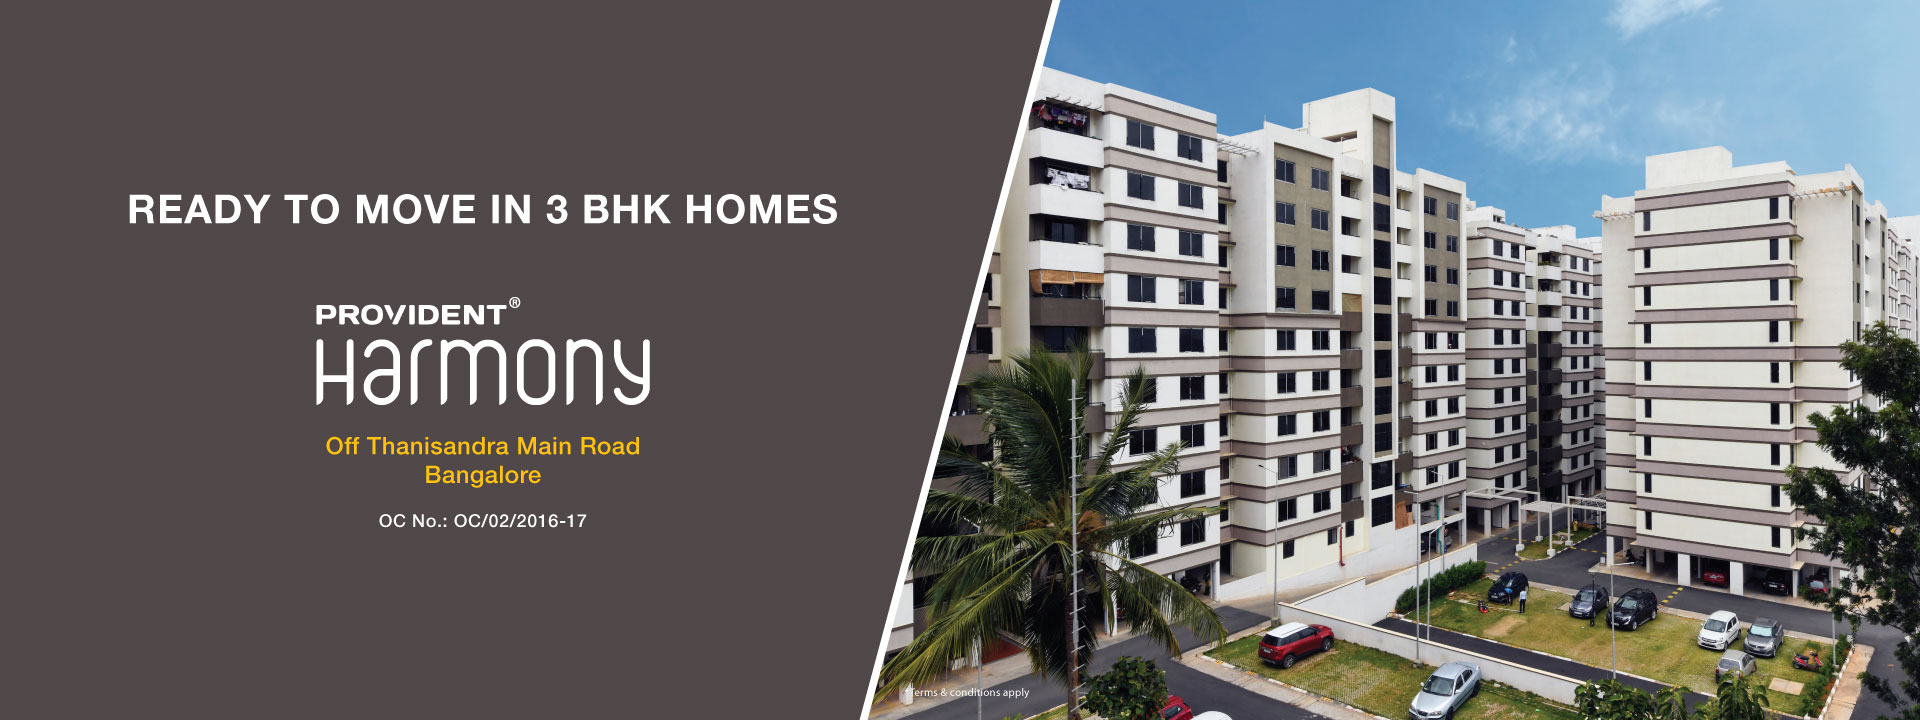 Book ready to move in 3 BHK homes at Provident Harmony in Bangalore Update